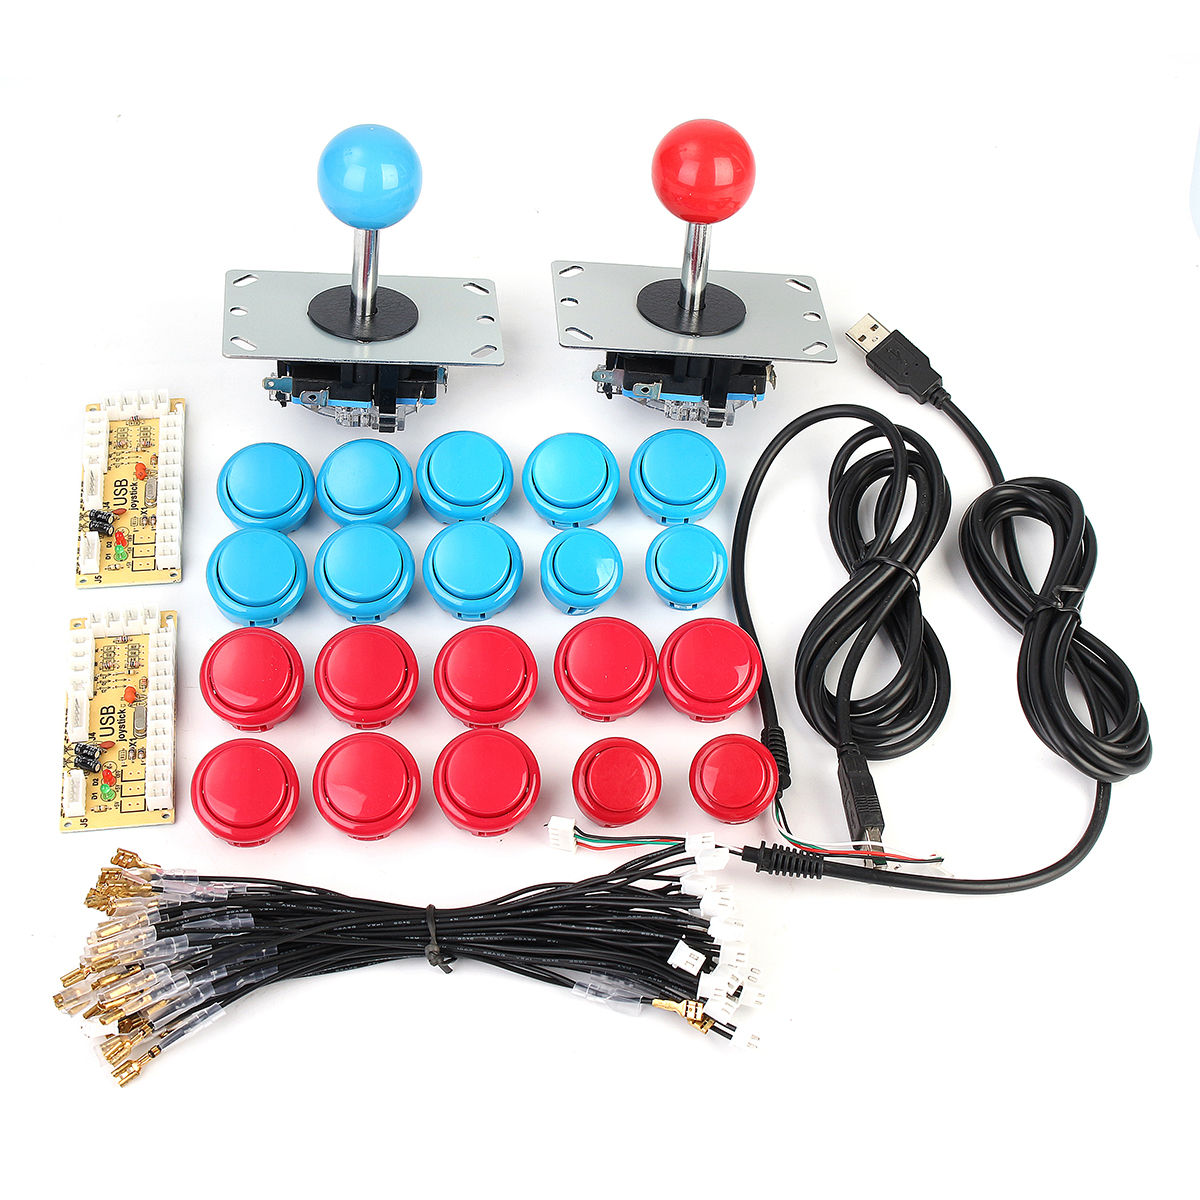 

2 Player Arcade Kit USB Encoder To PC Joystick 20 Buttons For MAME Controller